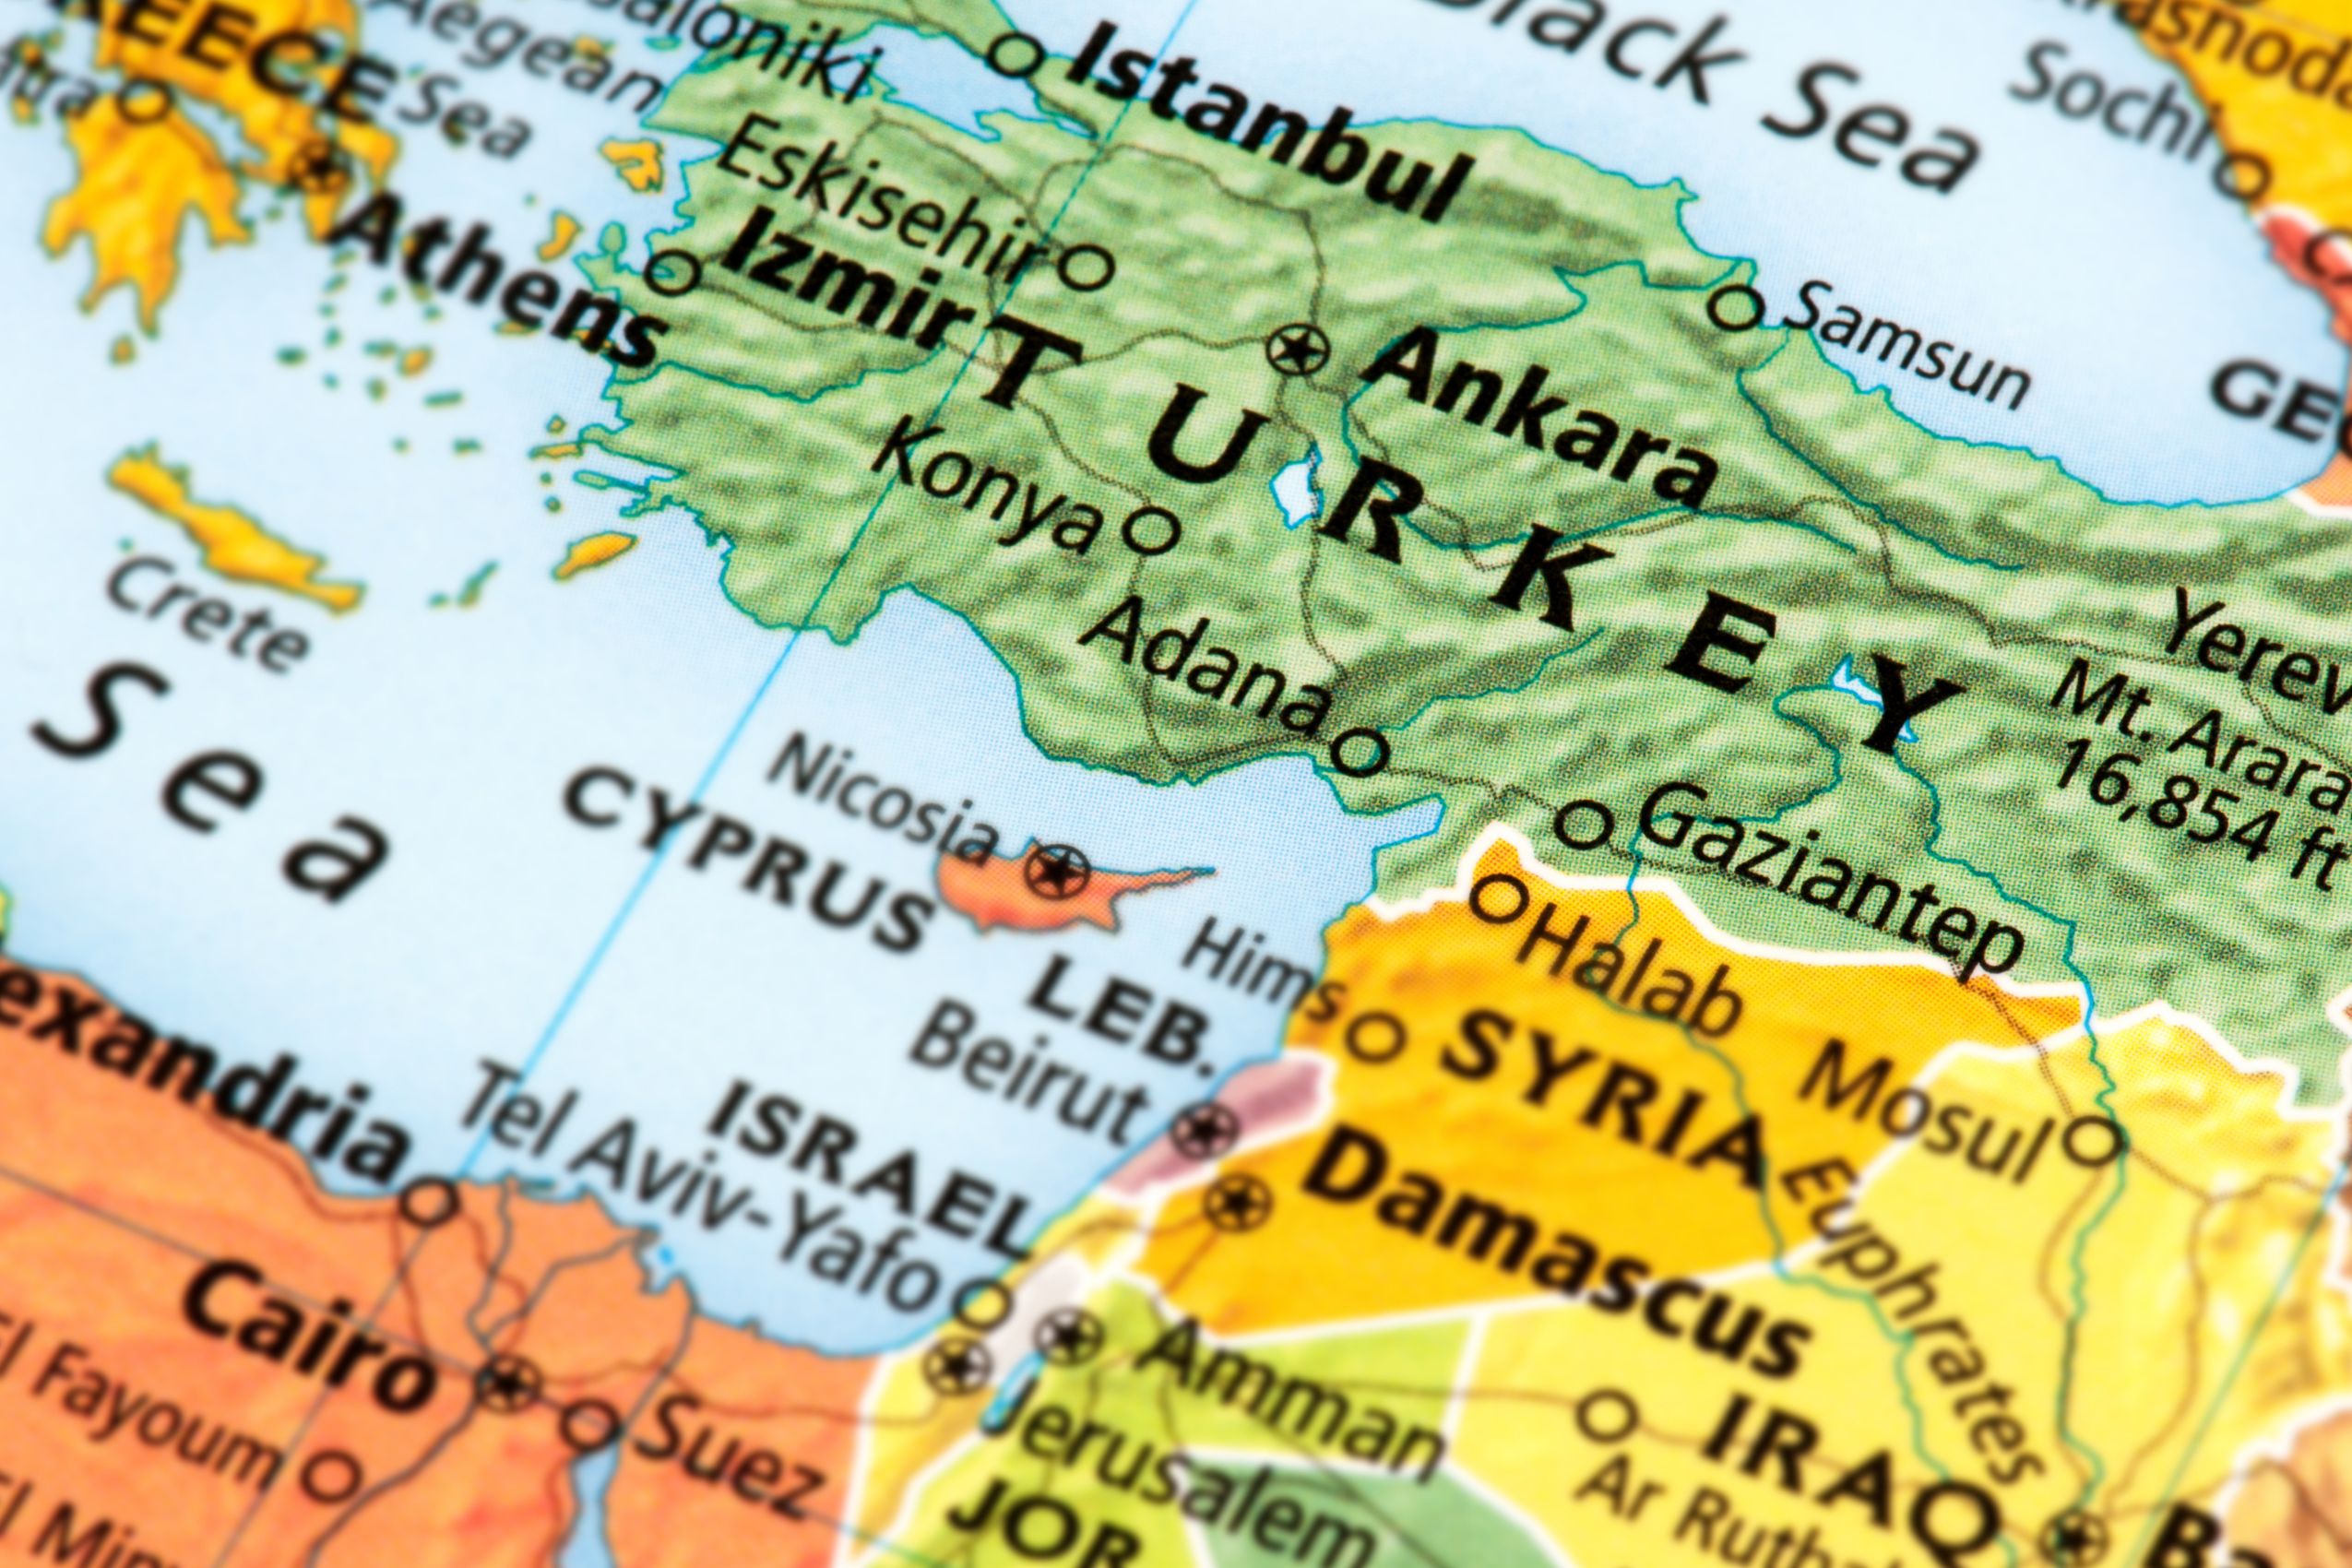 Turkey-Syria Earthquake:  SAT-7 calls believers to pray for the region